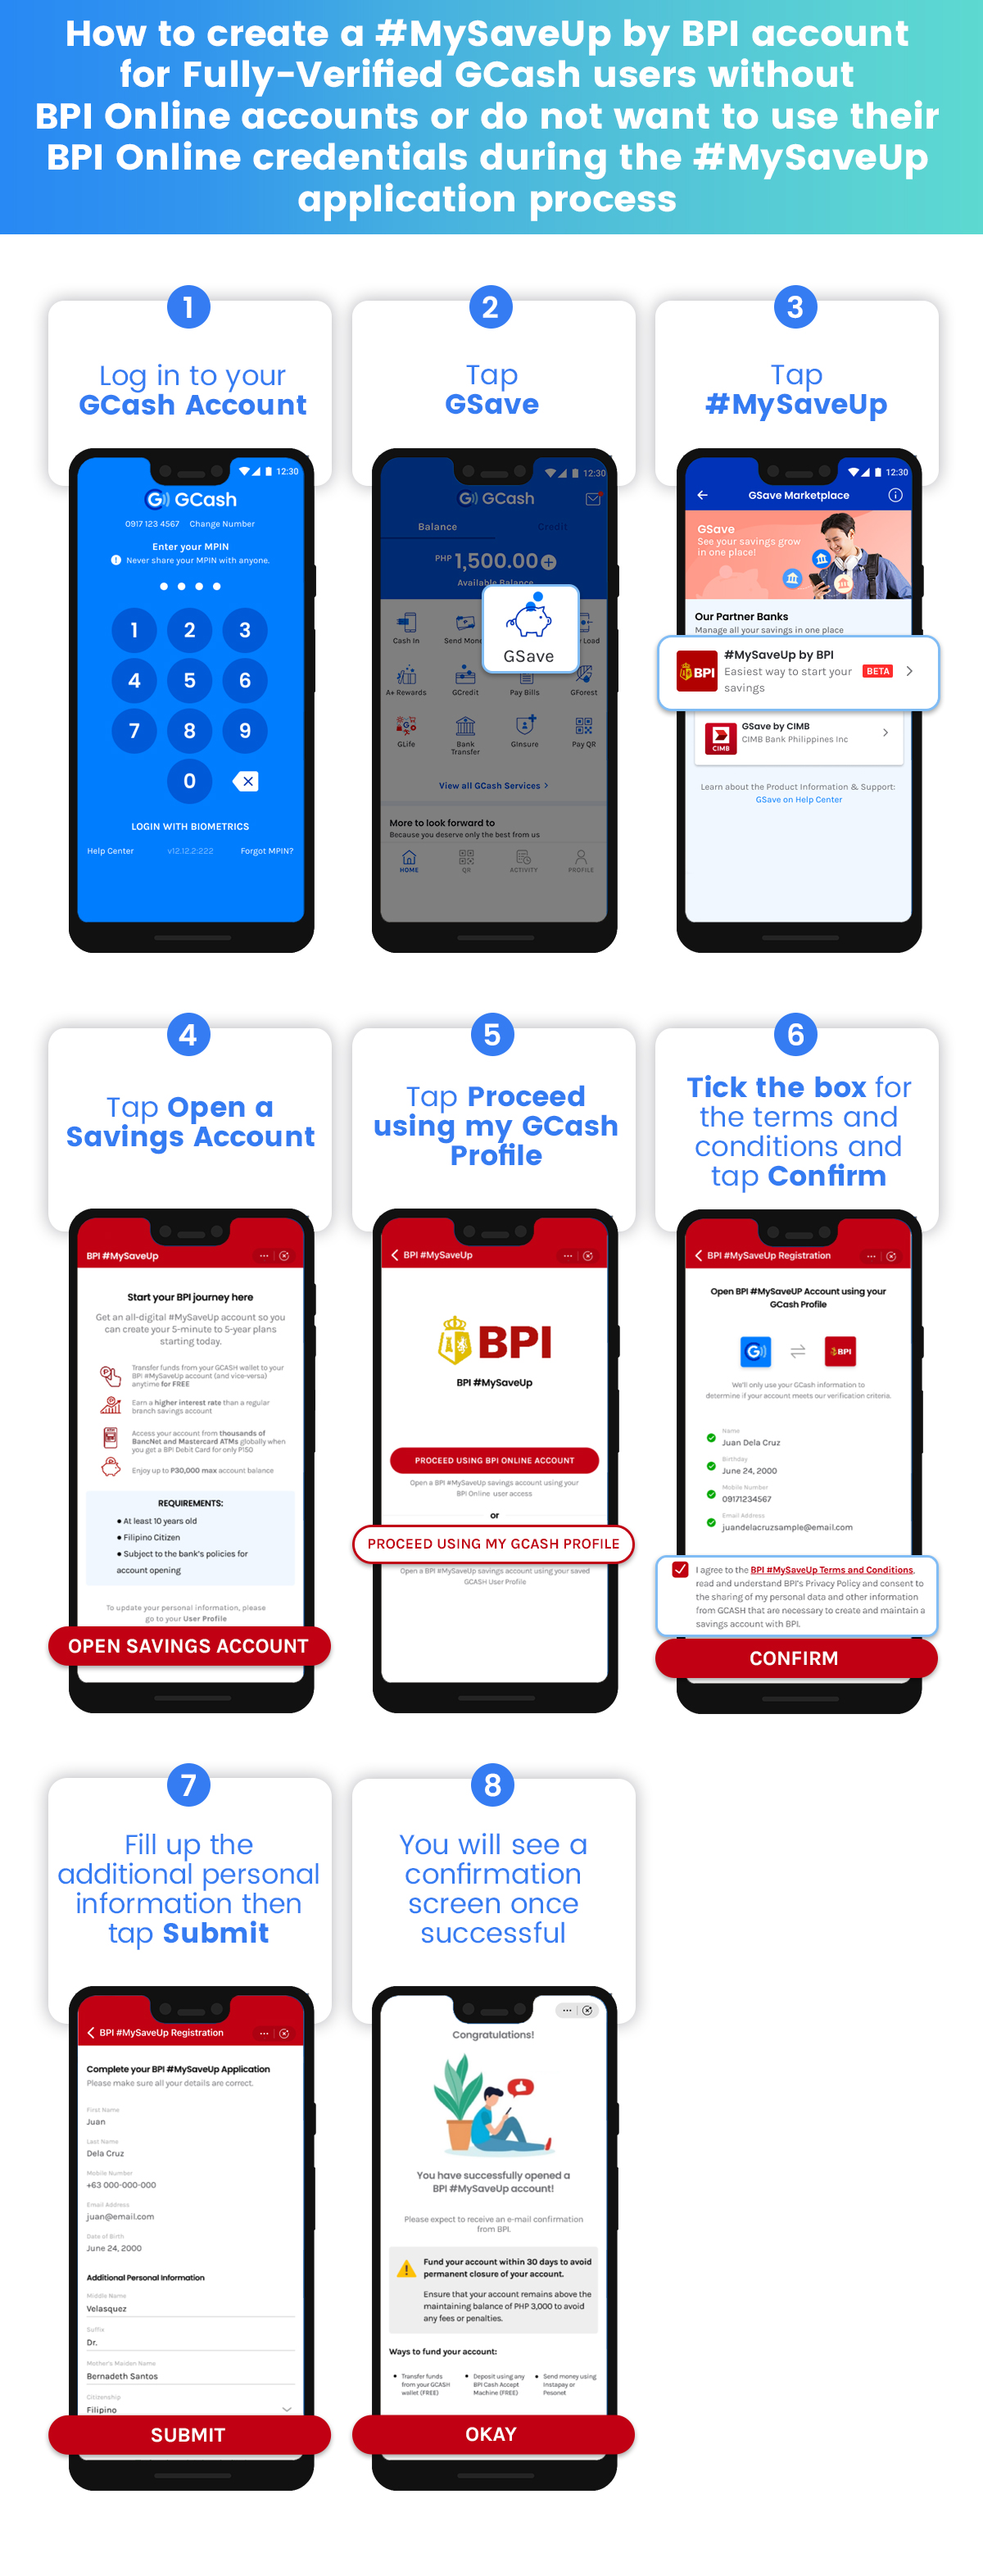 How_to_create_a__MySaveUp_by_BPI_account_for_Fully-Verified_GCash_users_without_BPI_Online_accounts_or_do_not_want_to_use_their_BPI_Online_credentials_during_the__MySaveUp_application_process__1_.jpg